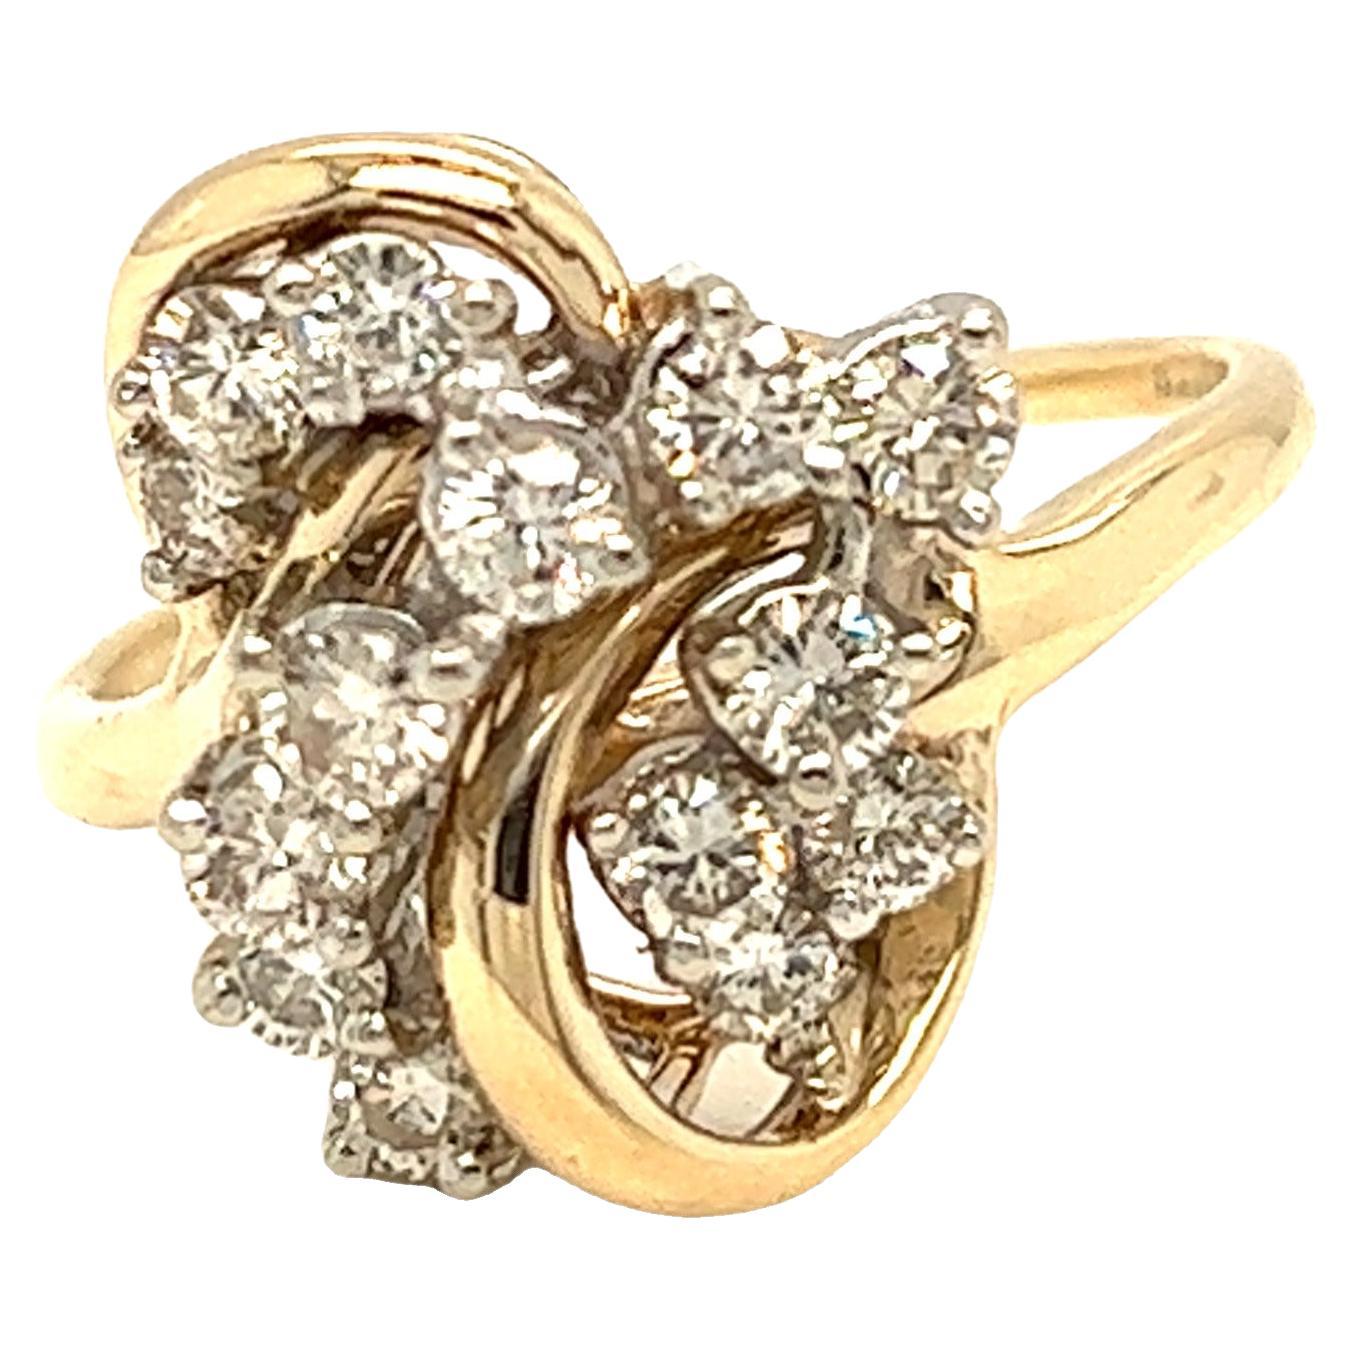 Vintage Swirl Cluster Diamond Ring 14k White and Yellow Gold